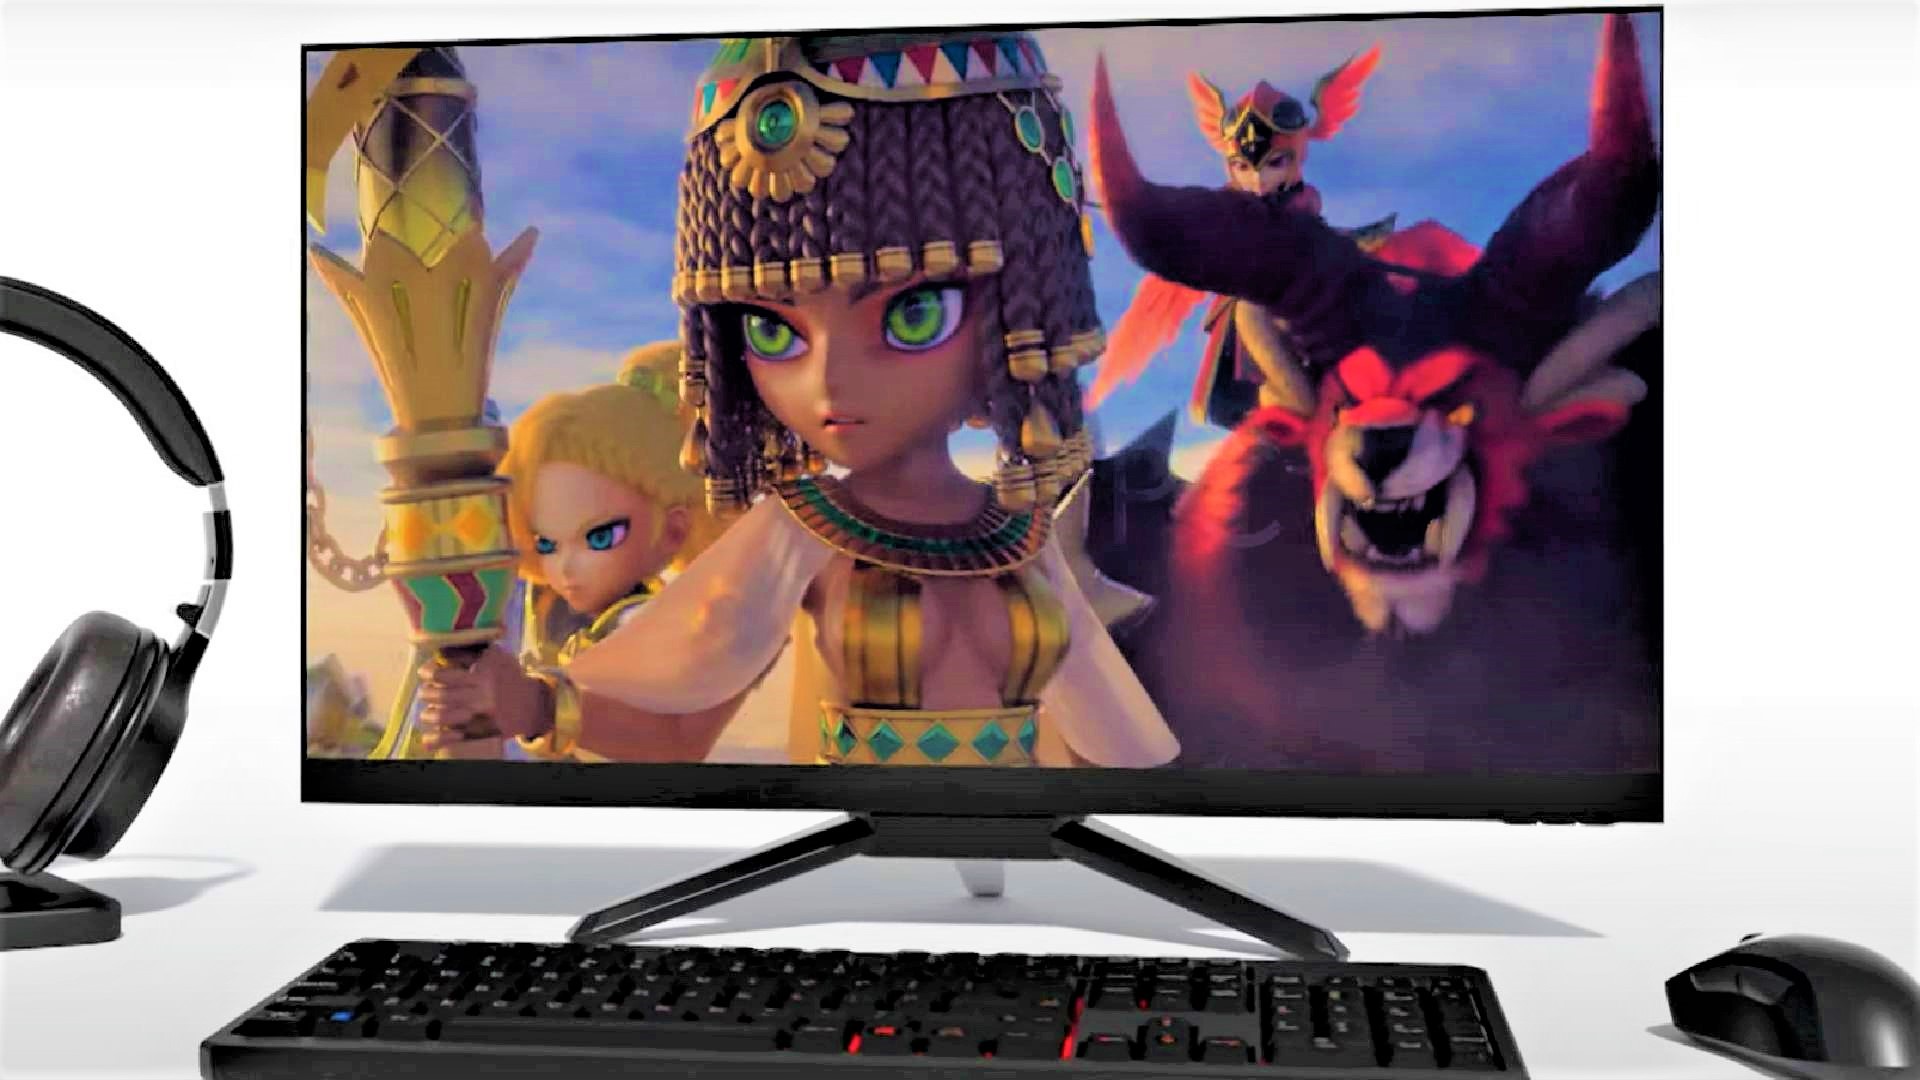 Google Play could turn your Windows rig into an Android gaming PC in 2022